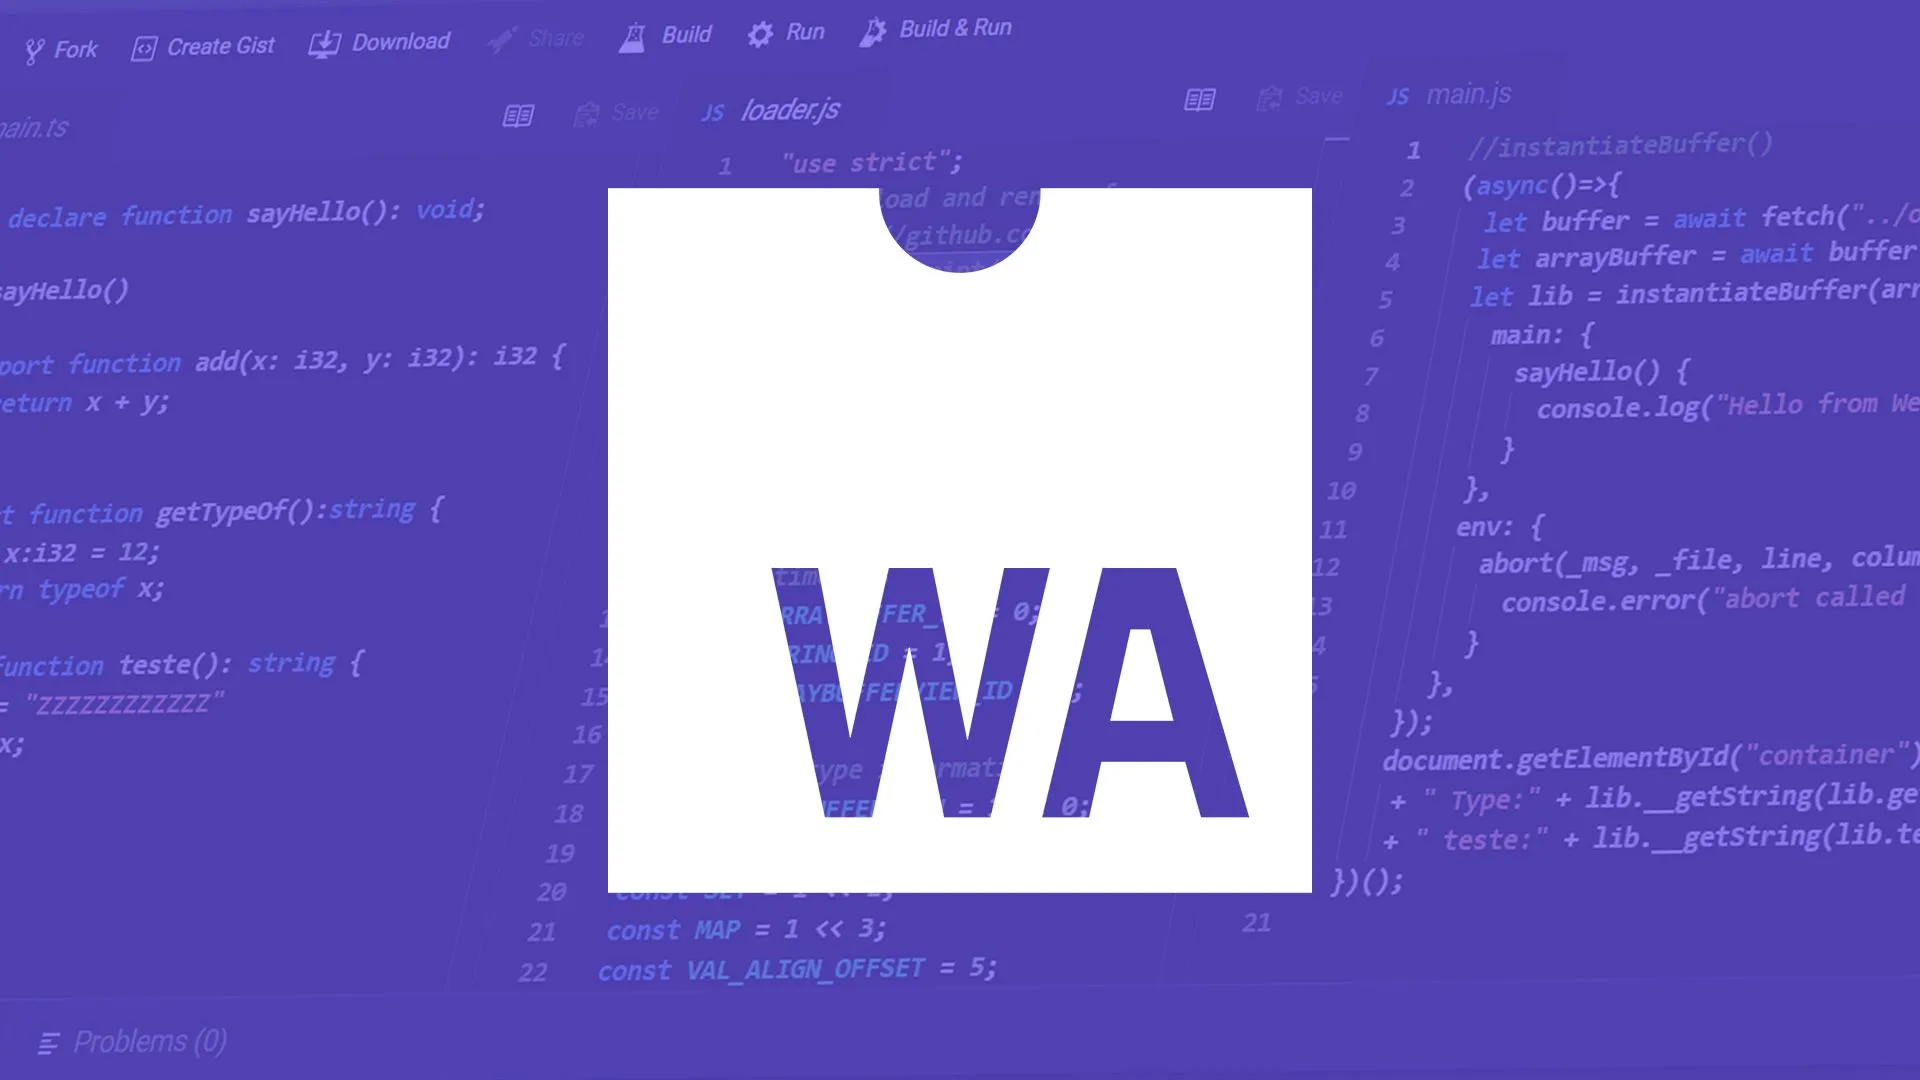 WASM is an Assembly-like low-level language developed for the web.